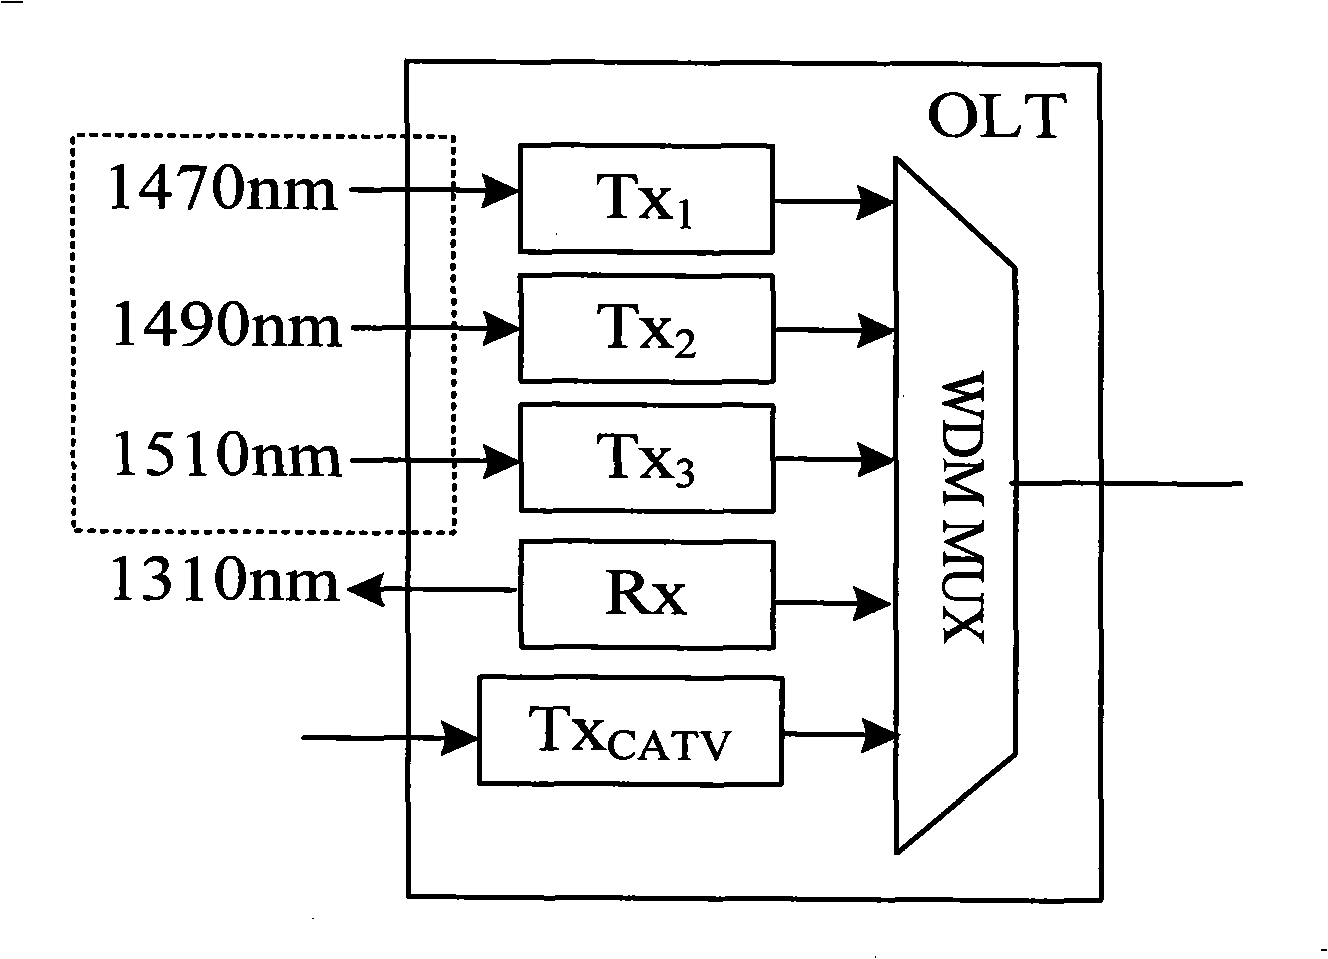 PON system mixing TDMA and WDM having function of local area network